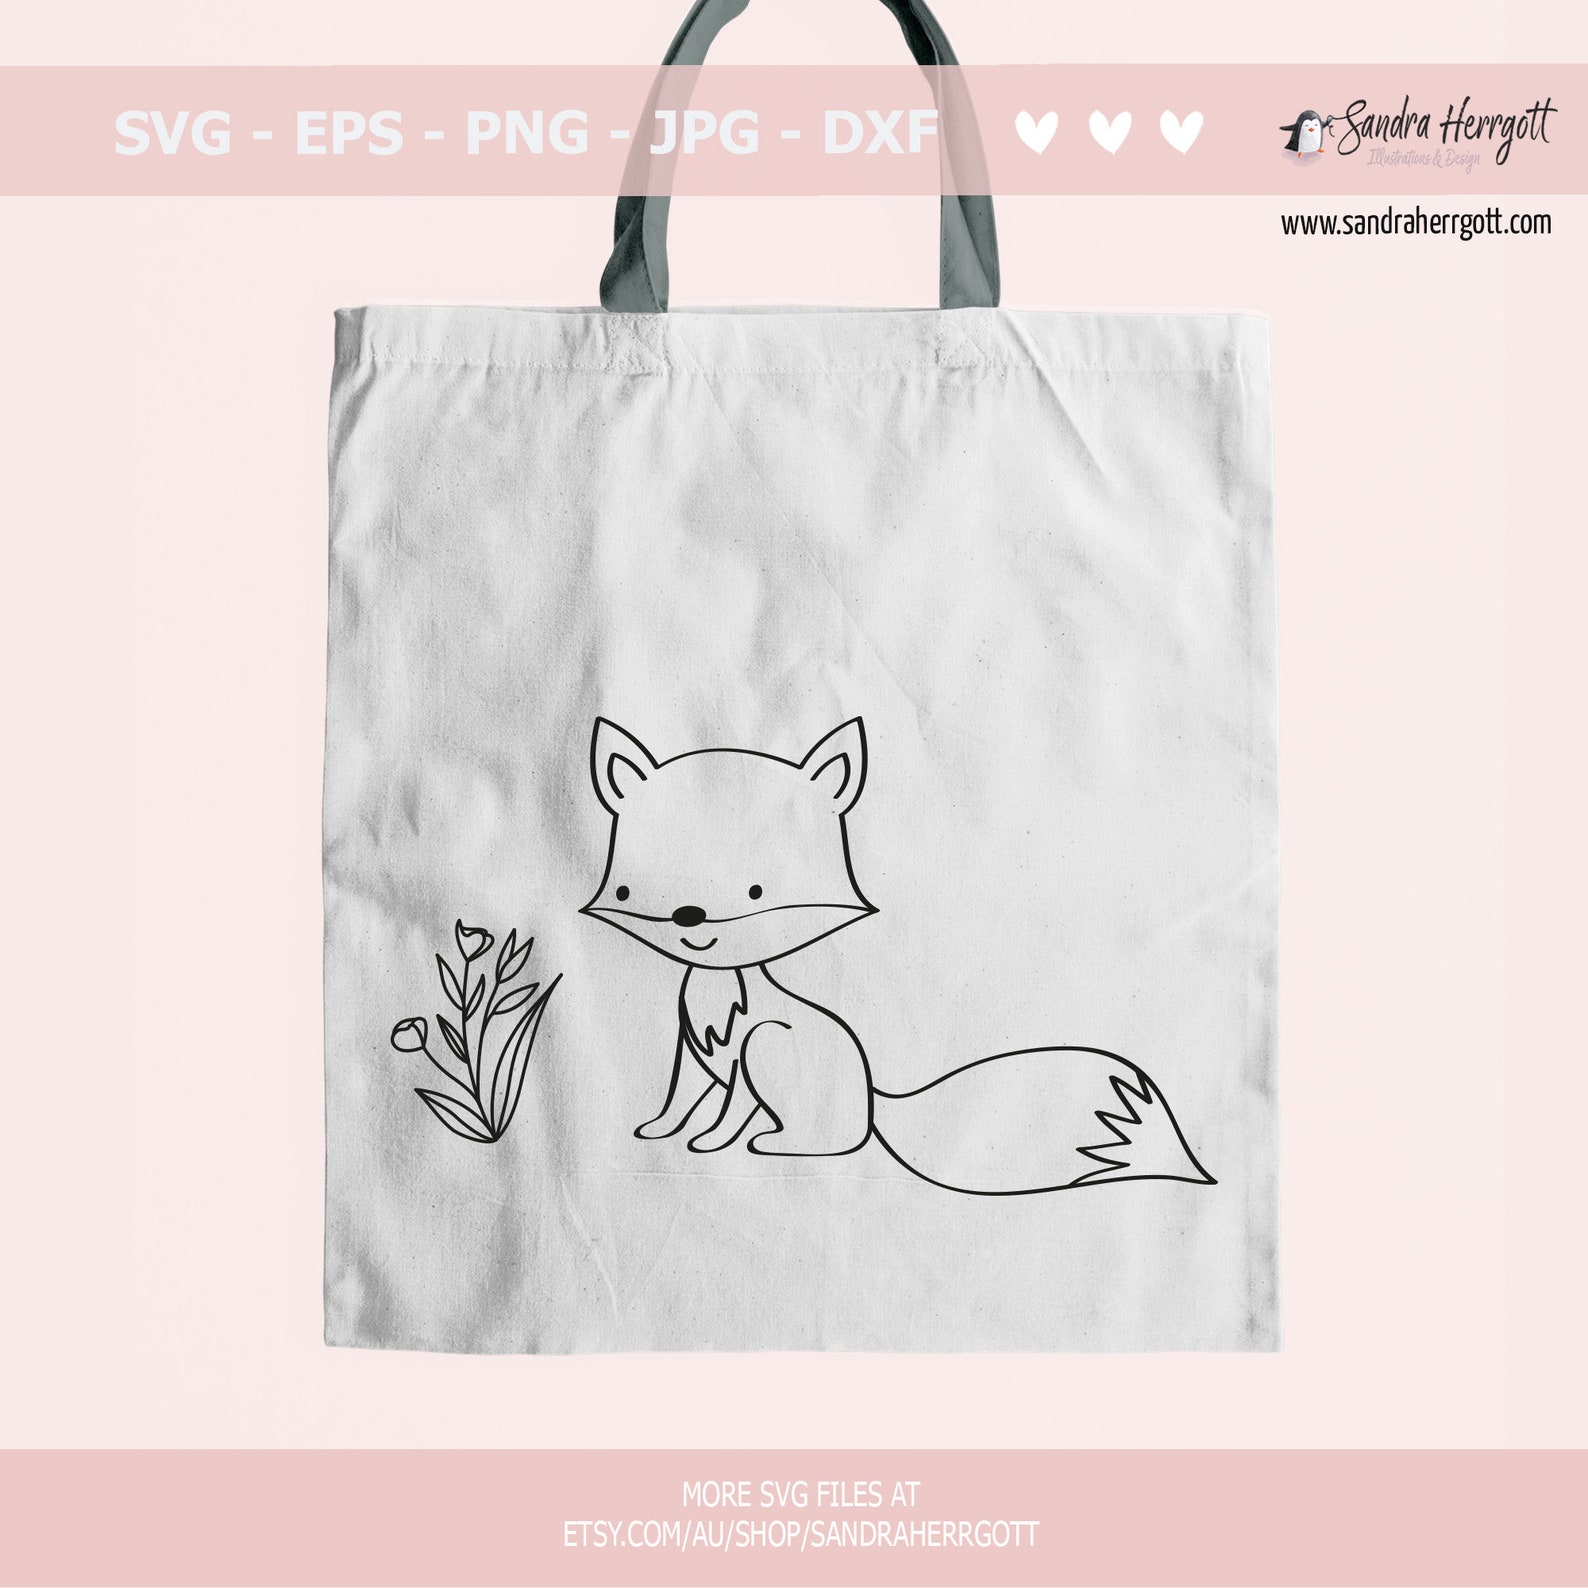 Bag designed with little fox.